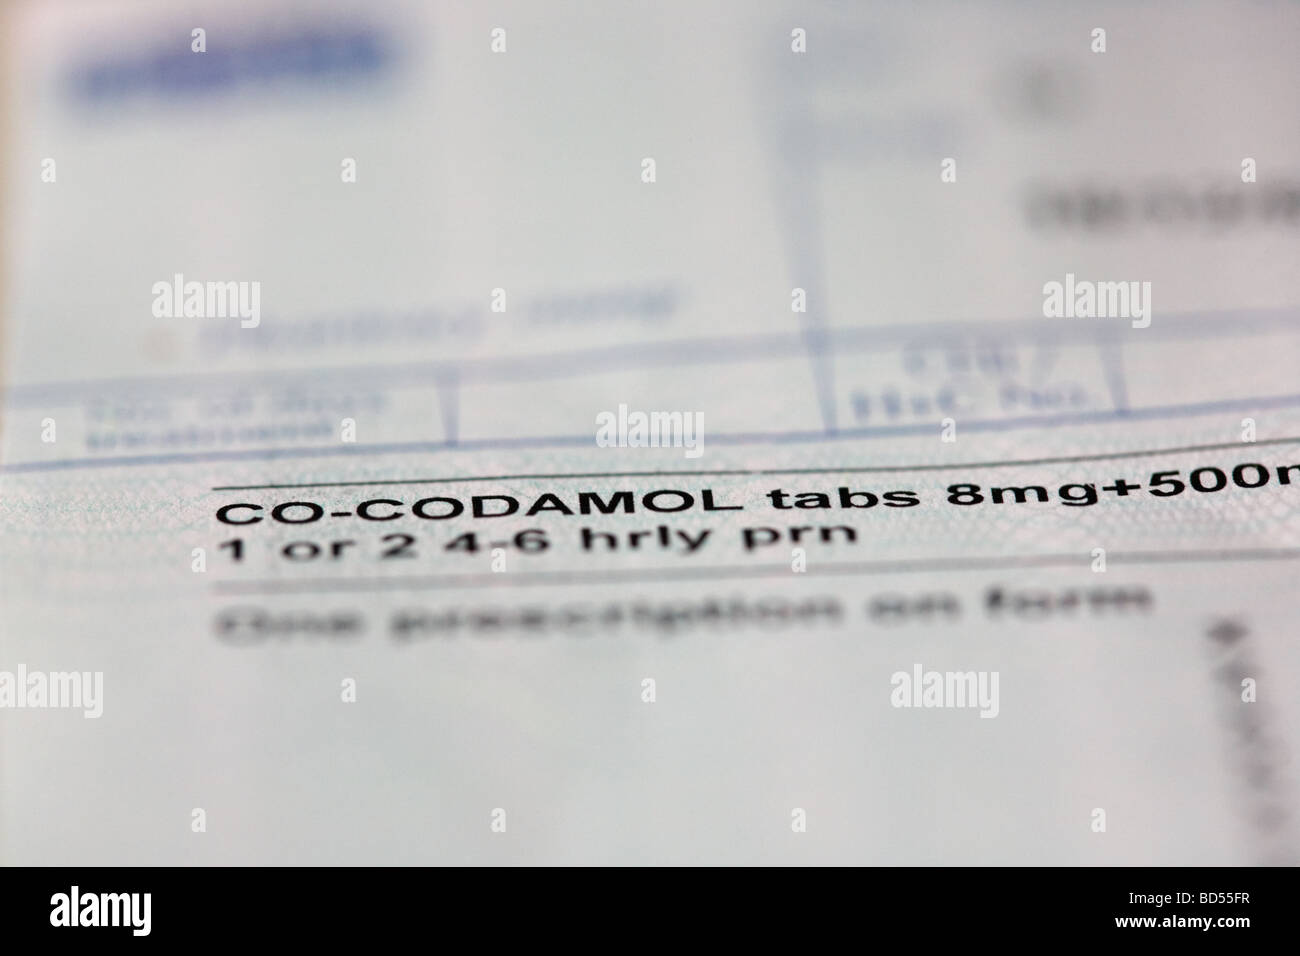 Northern Ireland NHS prescription form for co codamol painkillers Stock Photo